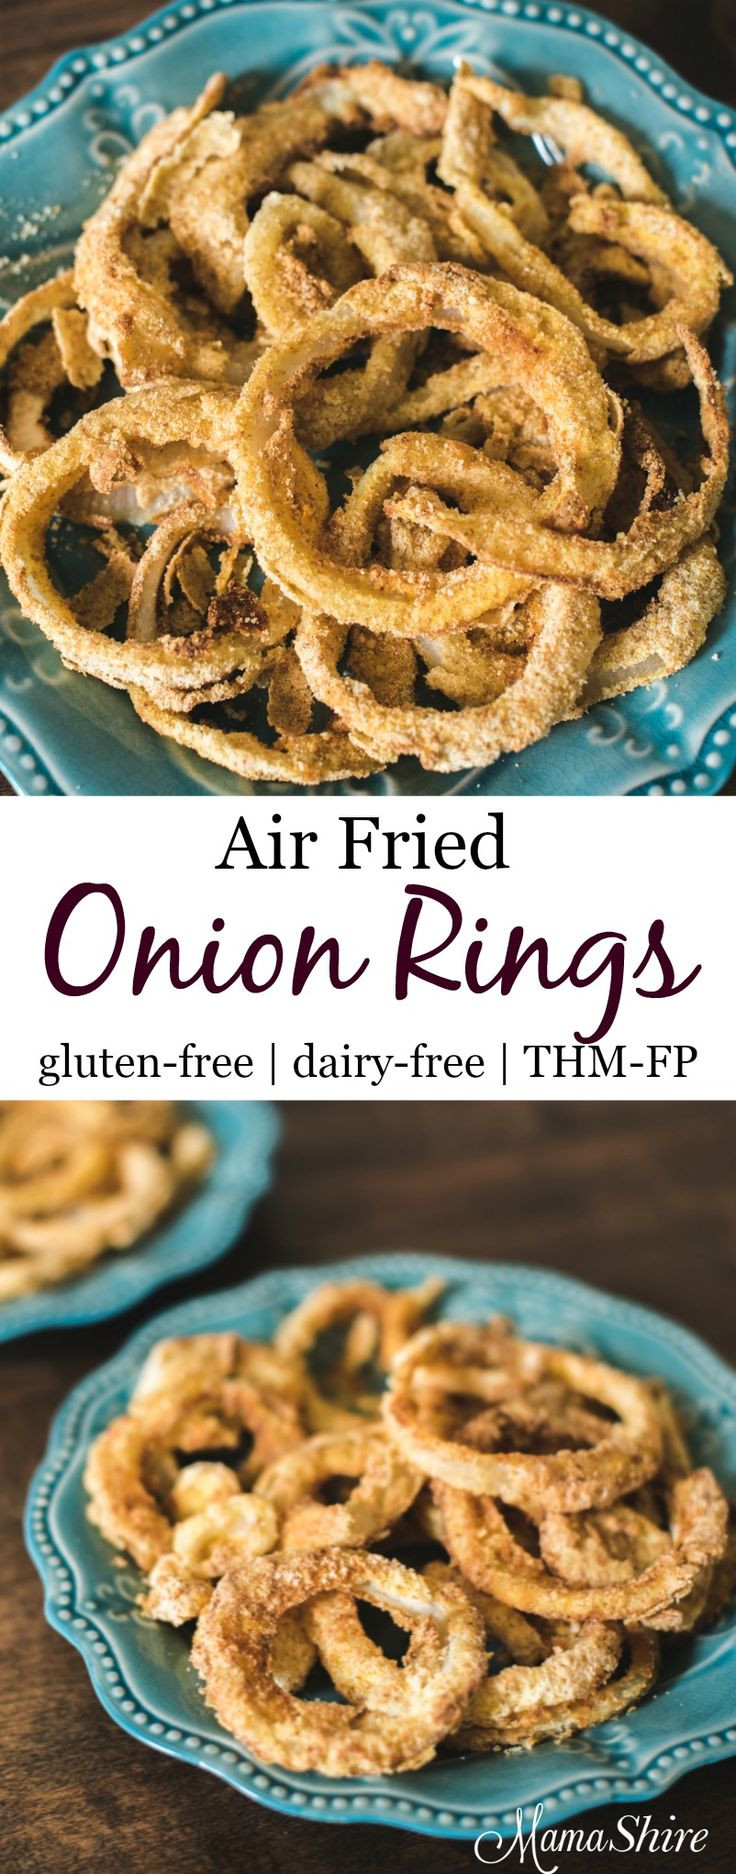 Low Carb Air Fryer Recipes
 best Latest & Greatest Trim Healthy Mama Recipes